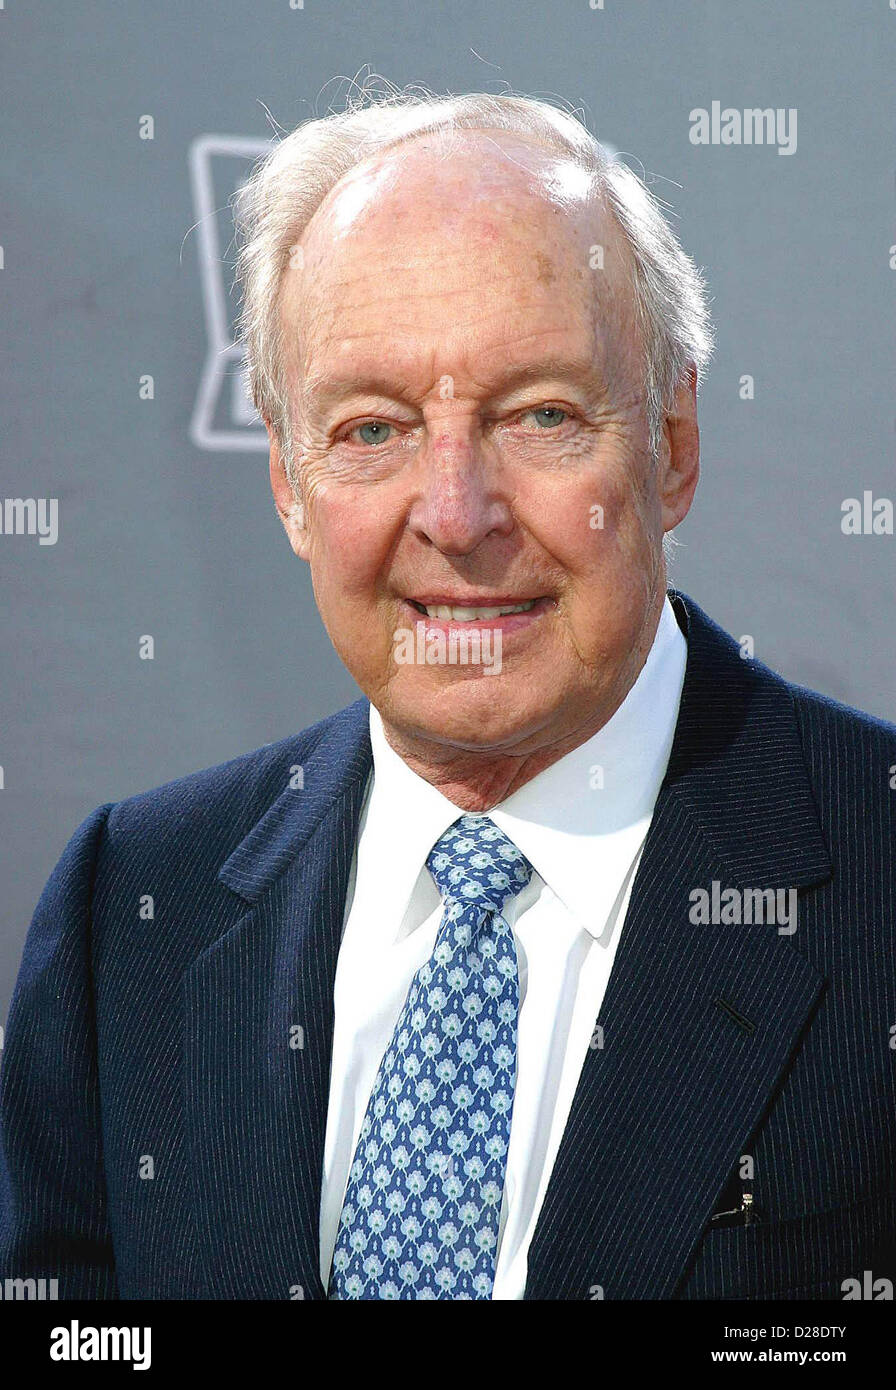 Jan. 16, 2013 - Livermore, California, U.S. - Conrad Bain, the Canadian-born actor  who played father figure Phillip Drummond on 'Diff'rent Strokes' has died of natural causes. Bain is known for playing the white adoptive father of two African-American brothers on the hit 'Diff'rent Strokes' that turned Gary Coleman into a TV star. PICTURED: March 2, 2003 - Hollywood, California, U.S. - CONRAD BAIN at the TV Land Awards. (Credit Image: Credit:  Clinton Wallace/Globe Photos/ZUMAPRESS.com/ Alamy live news) Stock Photo